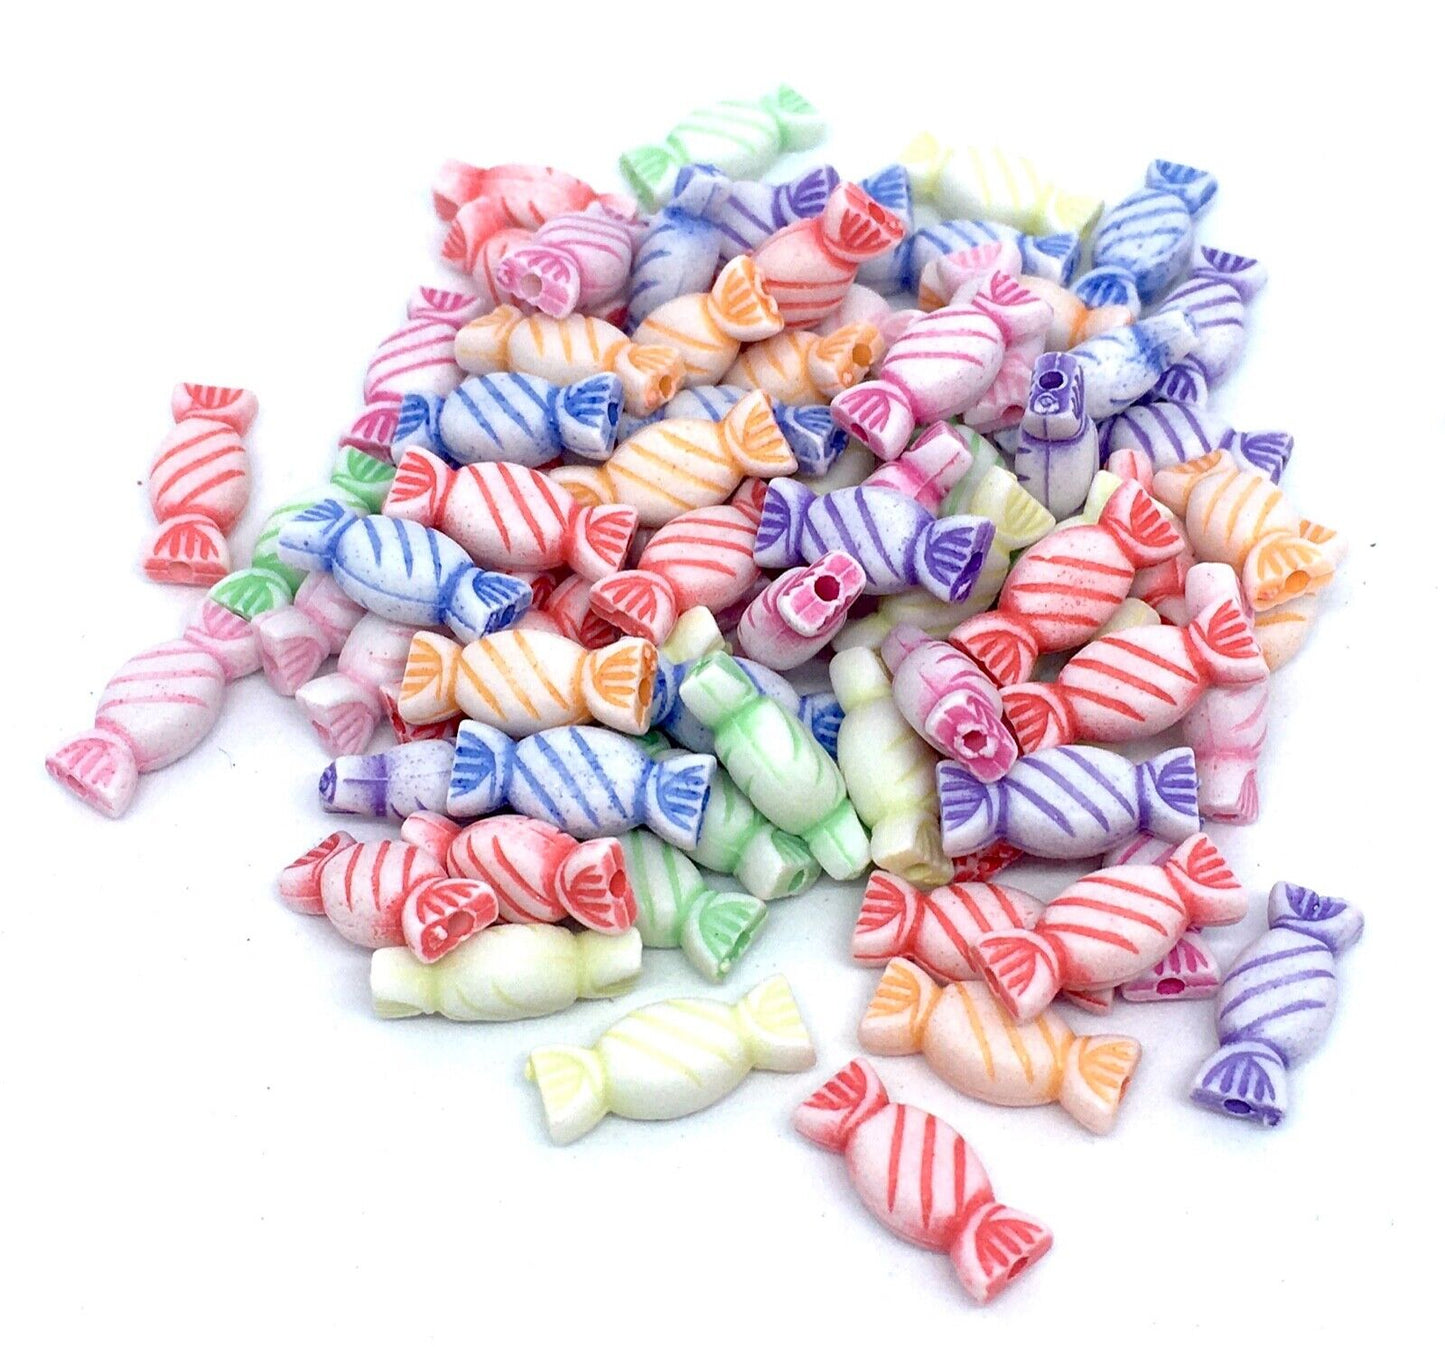 100 pcs Cute Creatures and Creations Spacer Beads - Pick Your Style